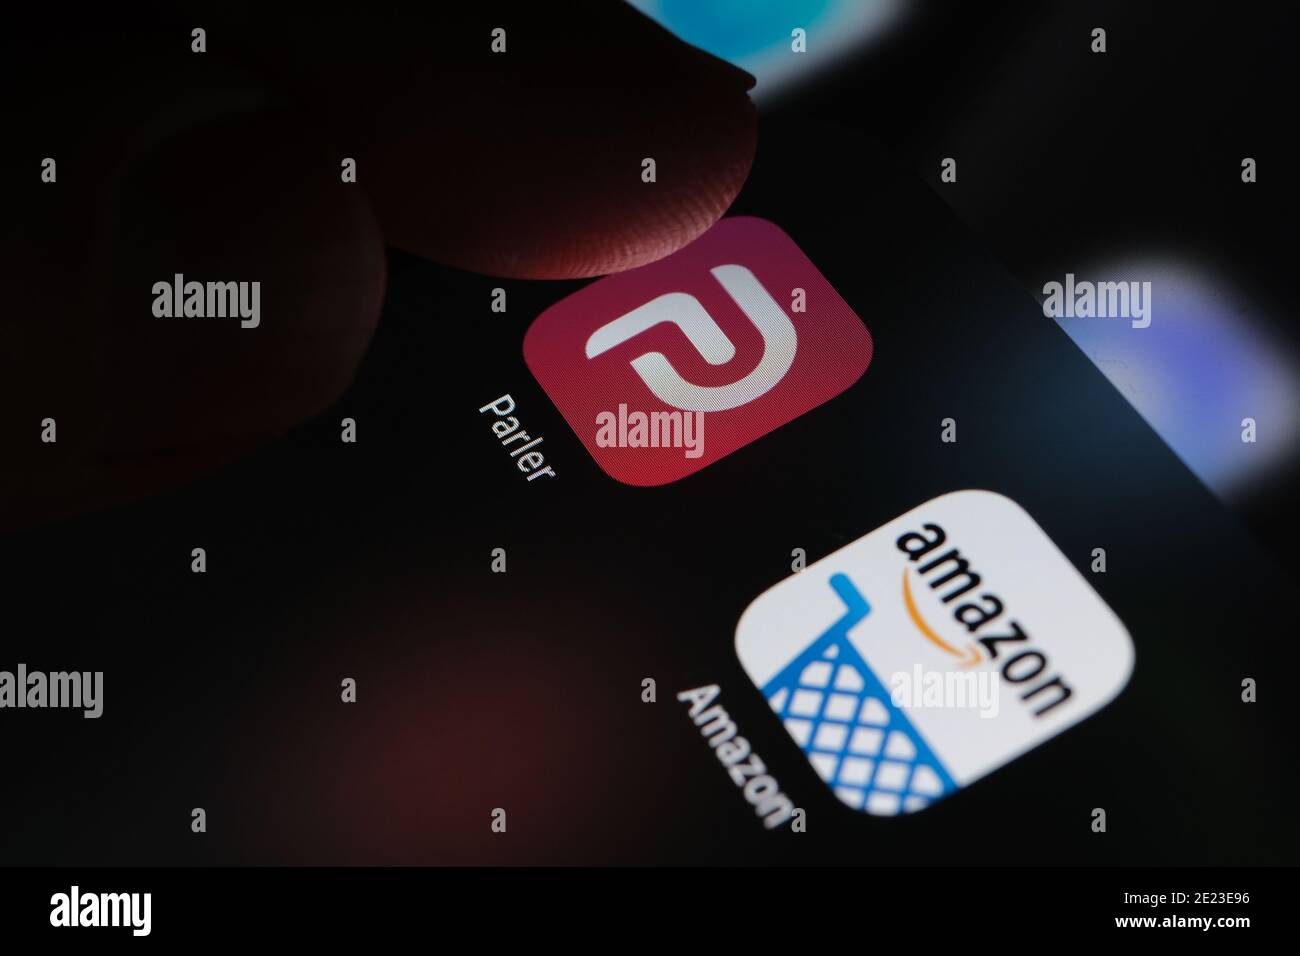 Parler app and Amazon app seen on the screen of iPad. Concept. Parler is a social media platform banned by Amazon AWS. Stock Photo